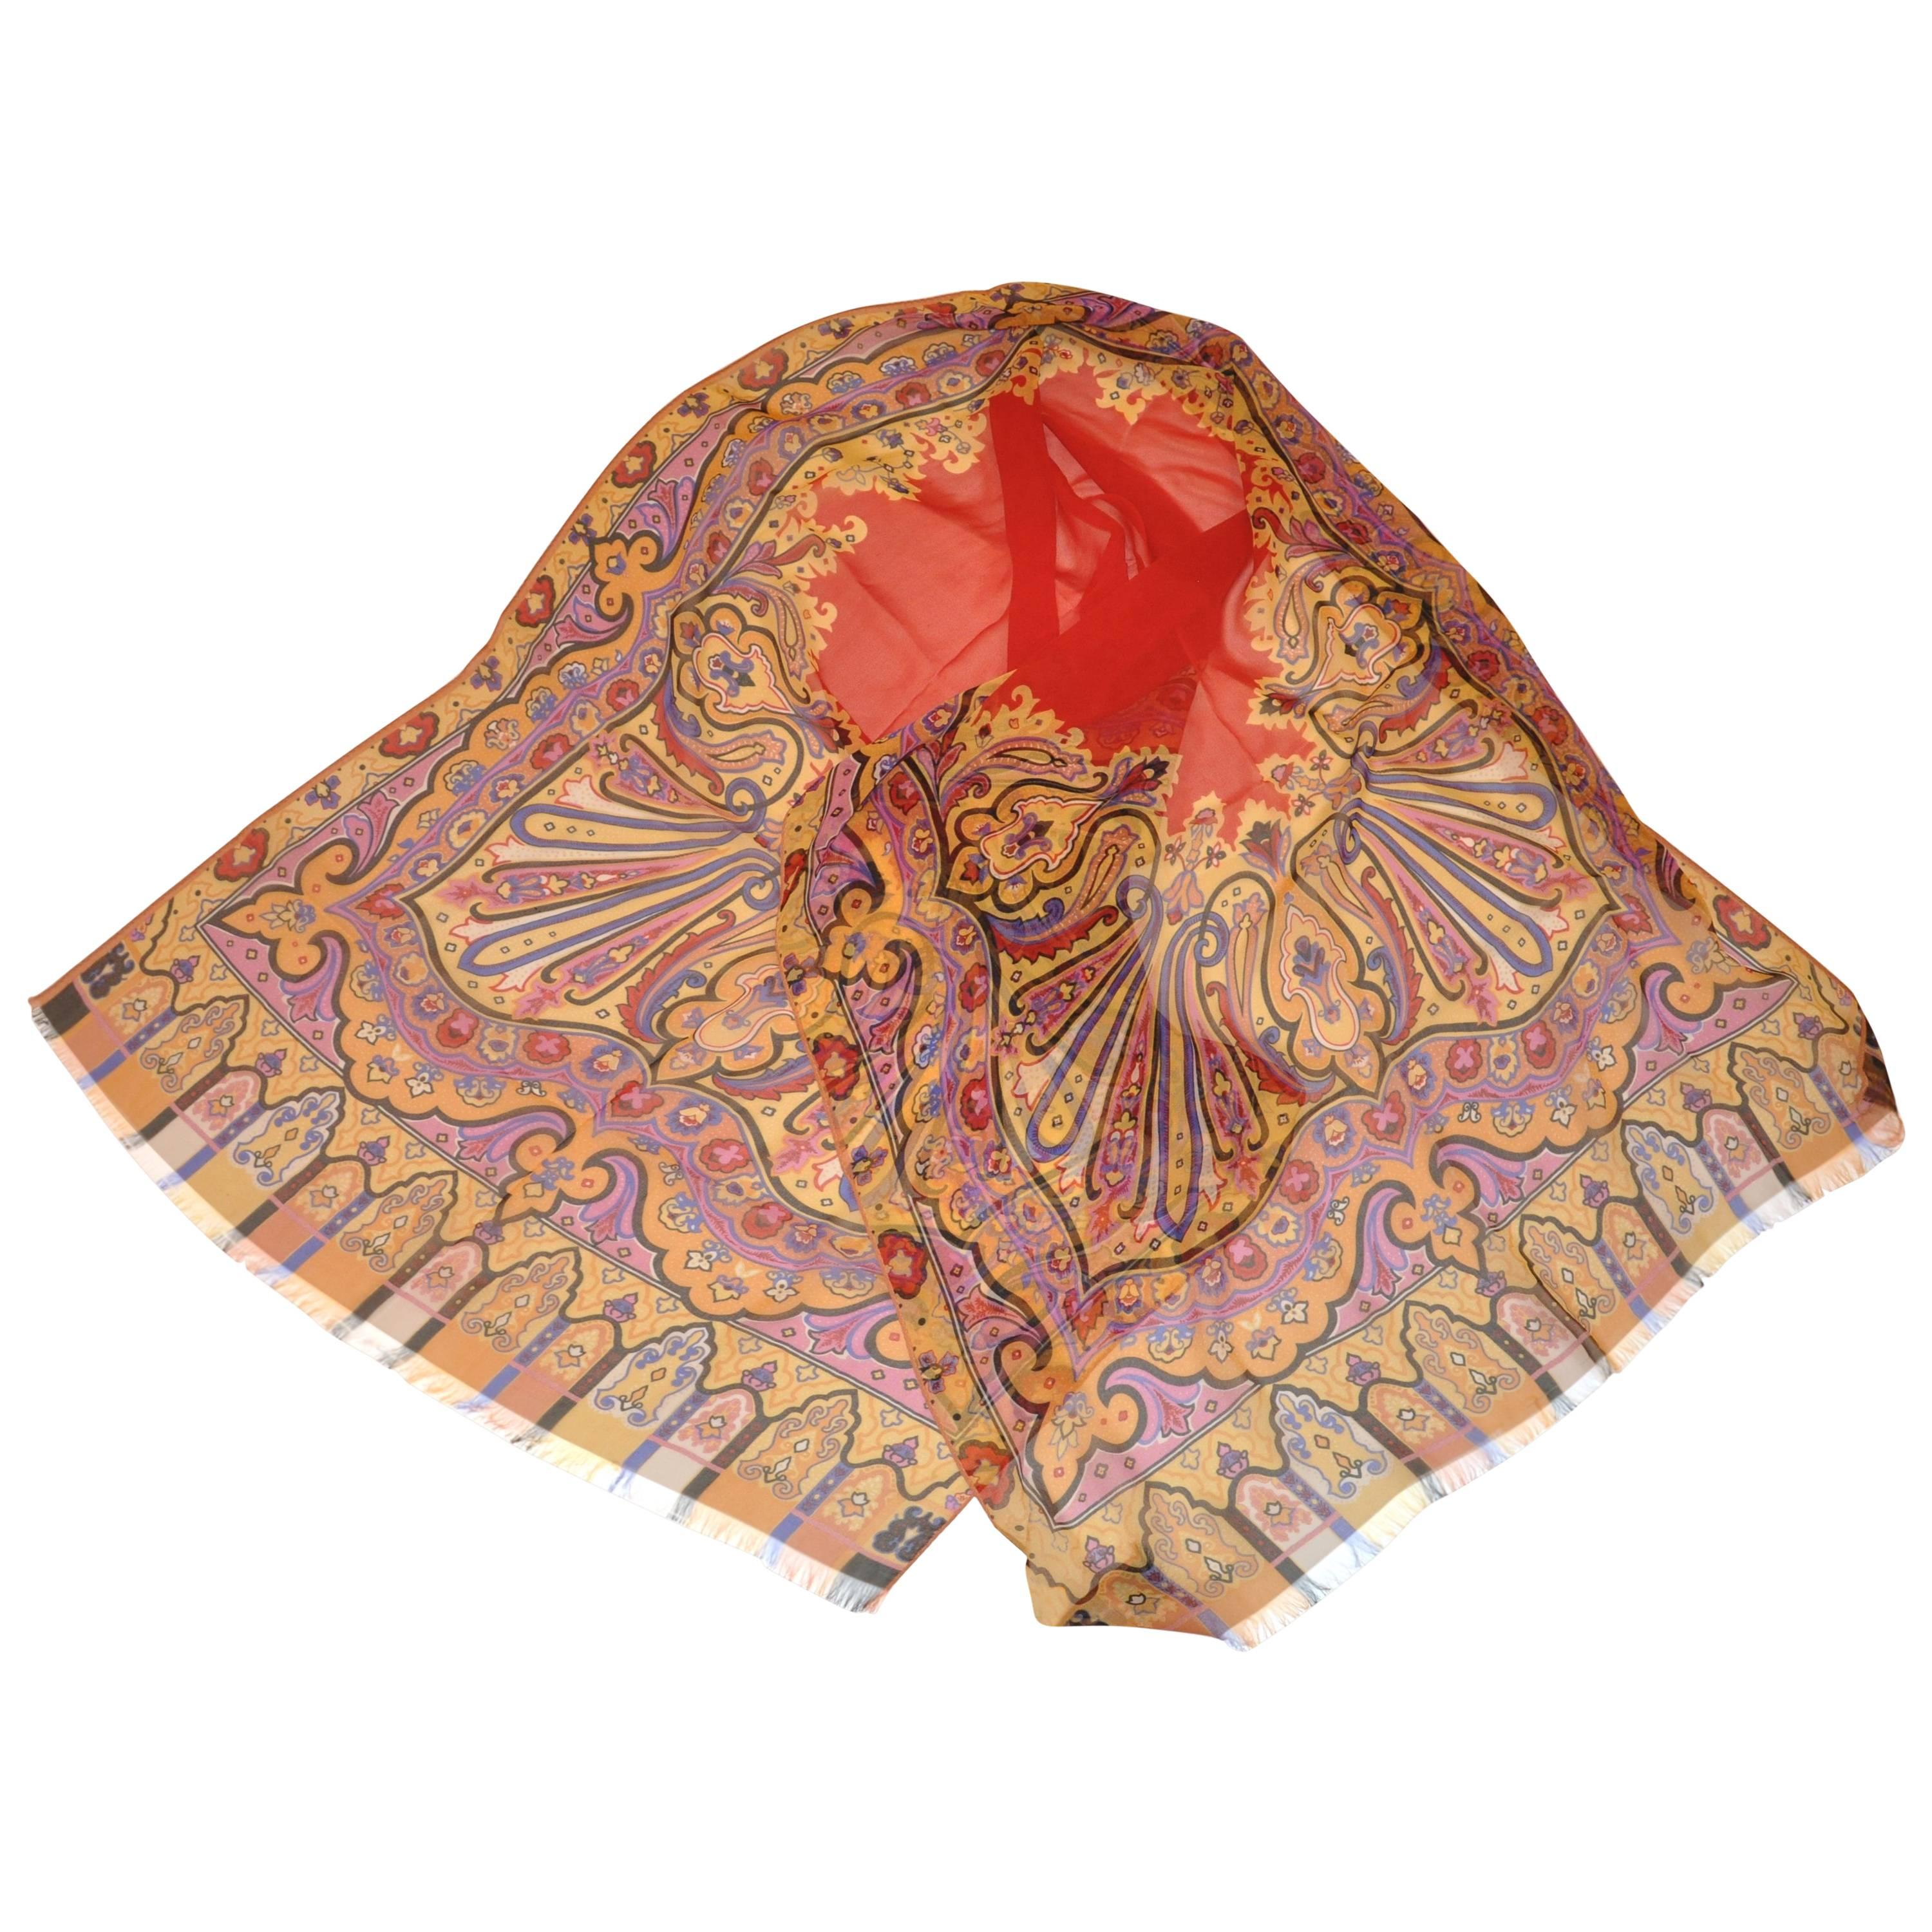 ETRO Large Bold Detailed Multi-Color Floral & Palsey Silk Chiffon Scarf